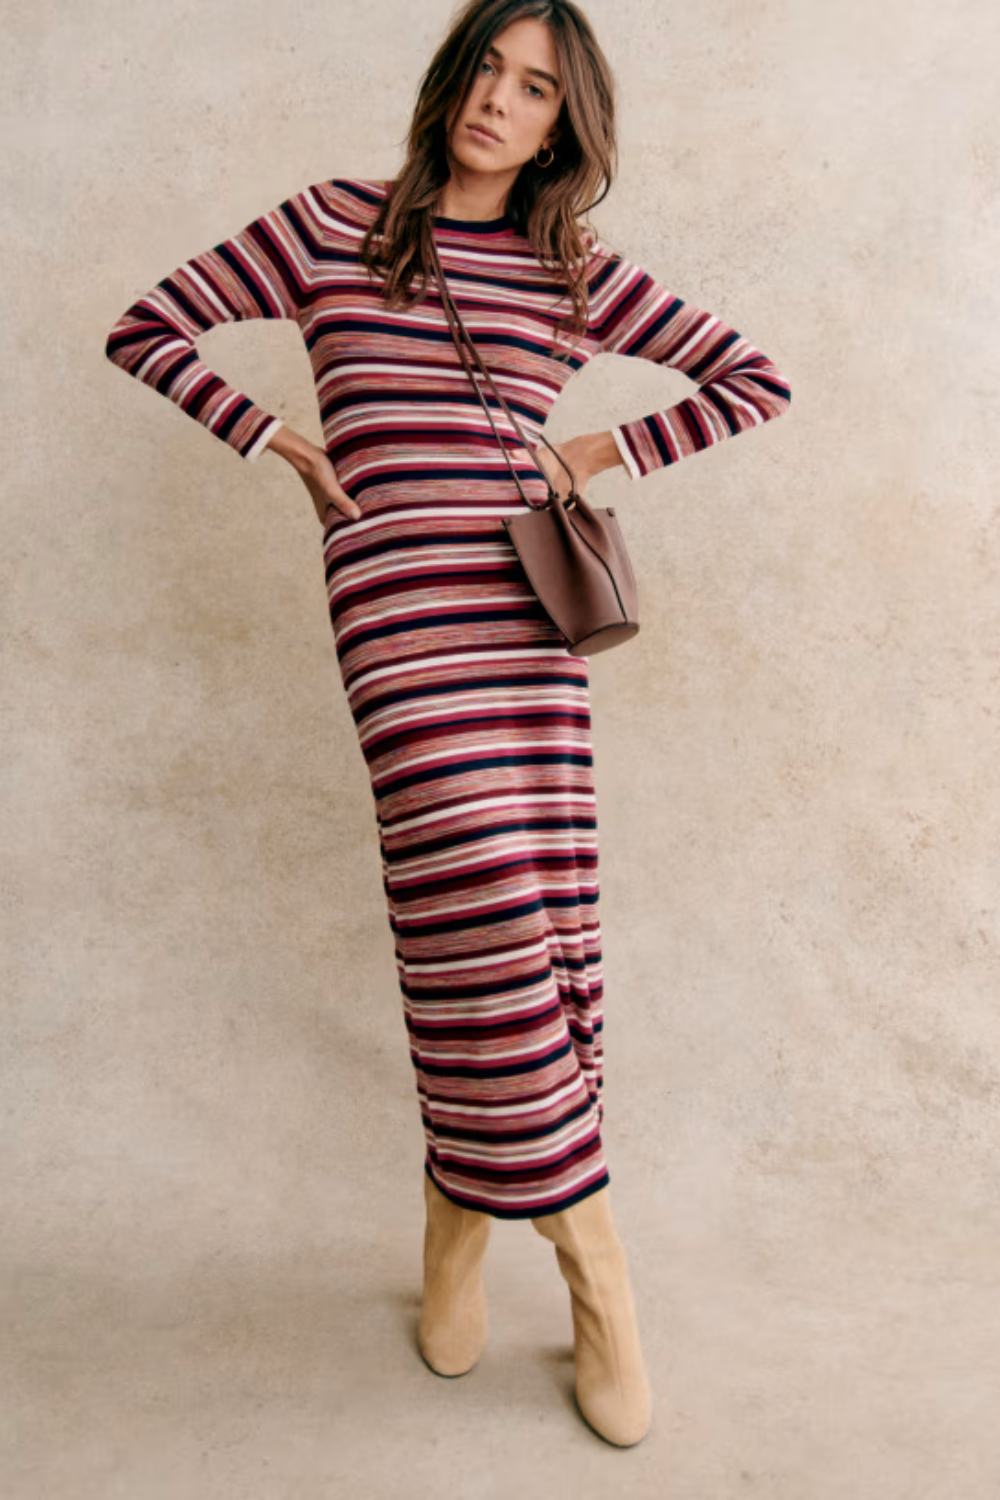 Casual Thanksgiving Outfit Idea - Striped sweater dress